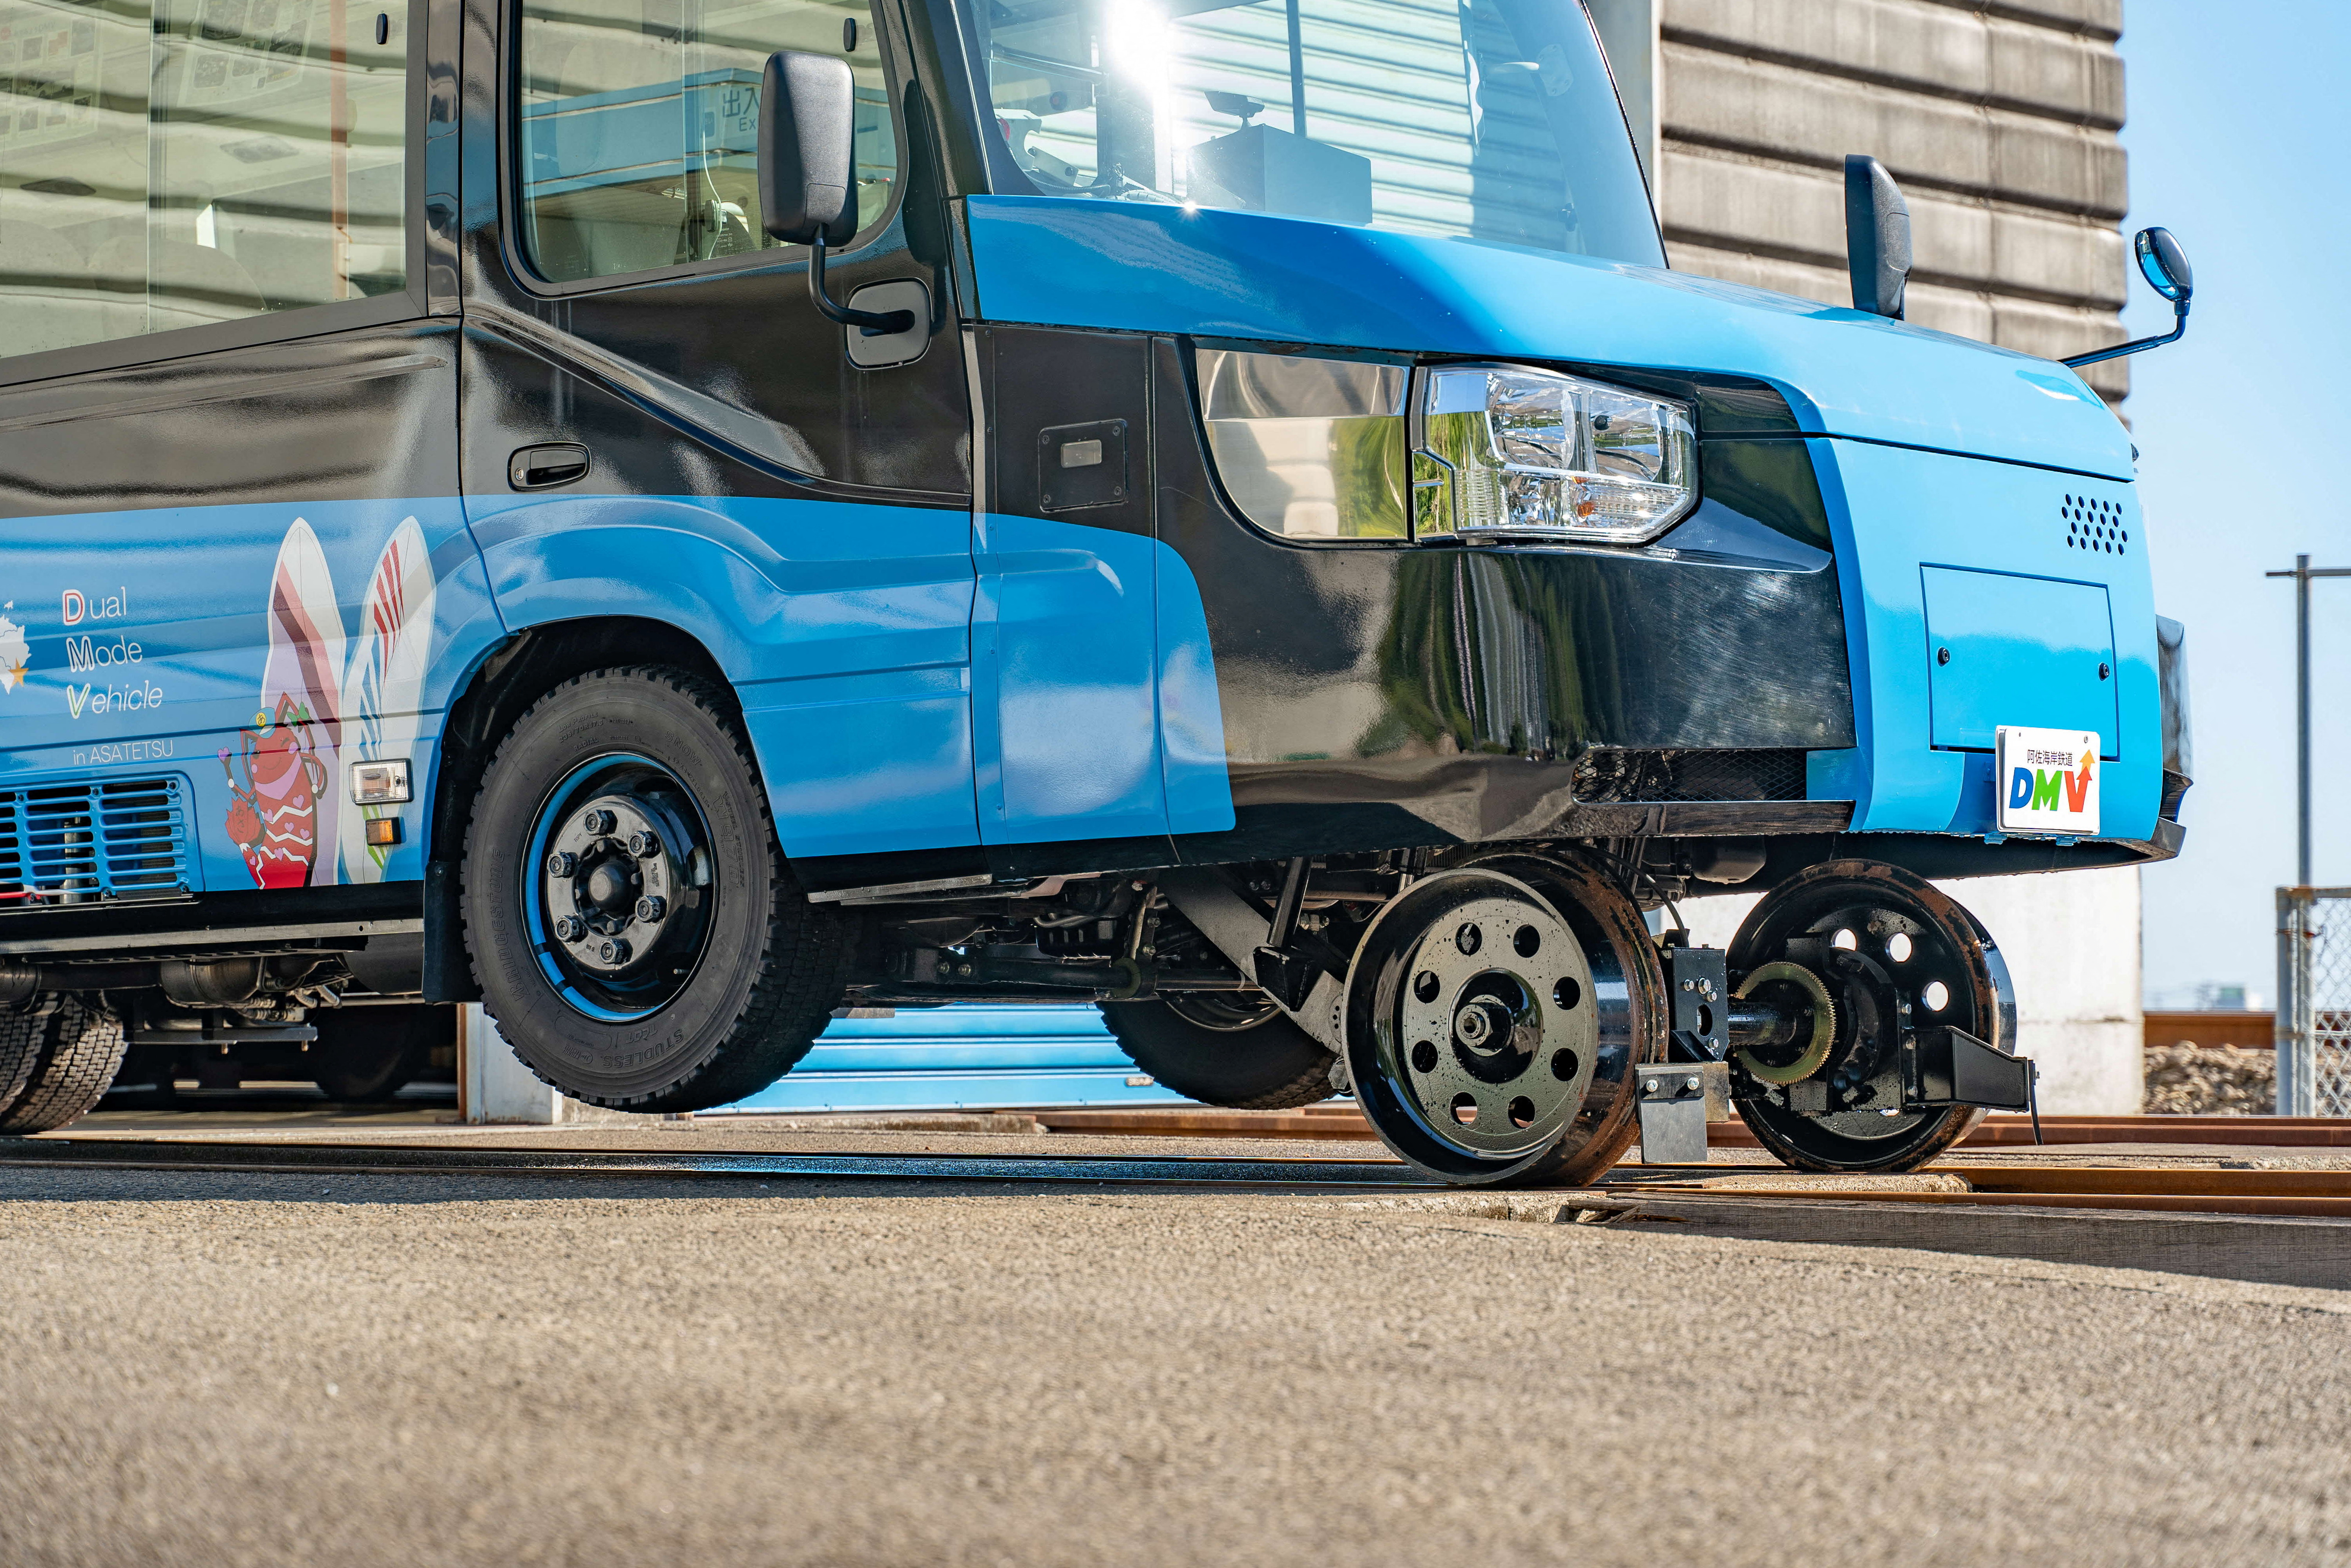 The parts of rubber tires and train wheels of a 'Dual-Mode Vehicle (DMV)' bus that can run both on conventional road surfaces and a railway track, are seen during its test run in Kaiyo Town, Tokushima Prefectue, Japan, in this handout photo taken in March 2021 and released by Tokushima Prefectural Government, obtained by Reuters on December 24, 2021. Tokushima Prefectural Government/Handout via REUTERS  